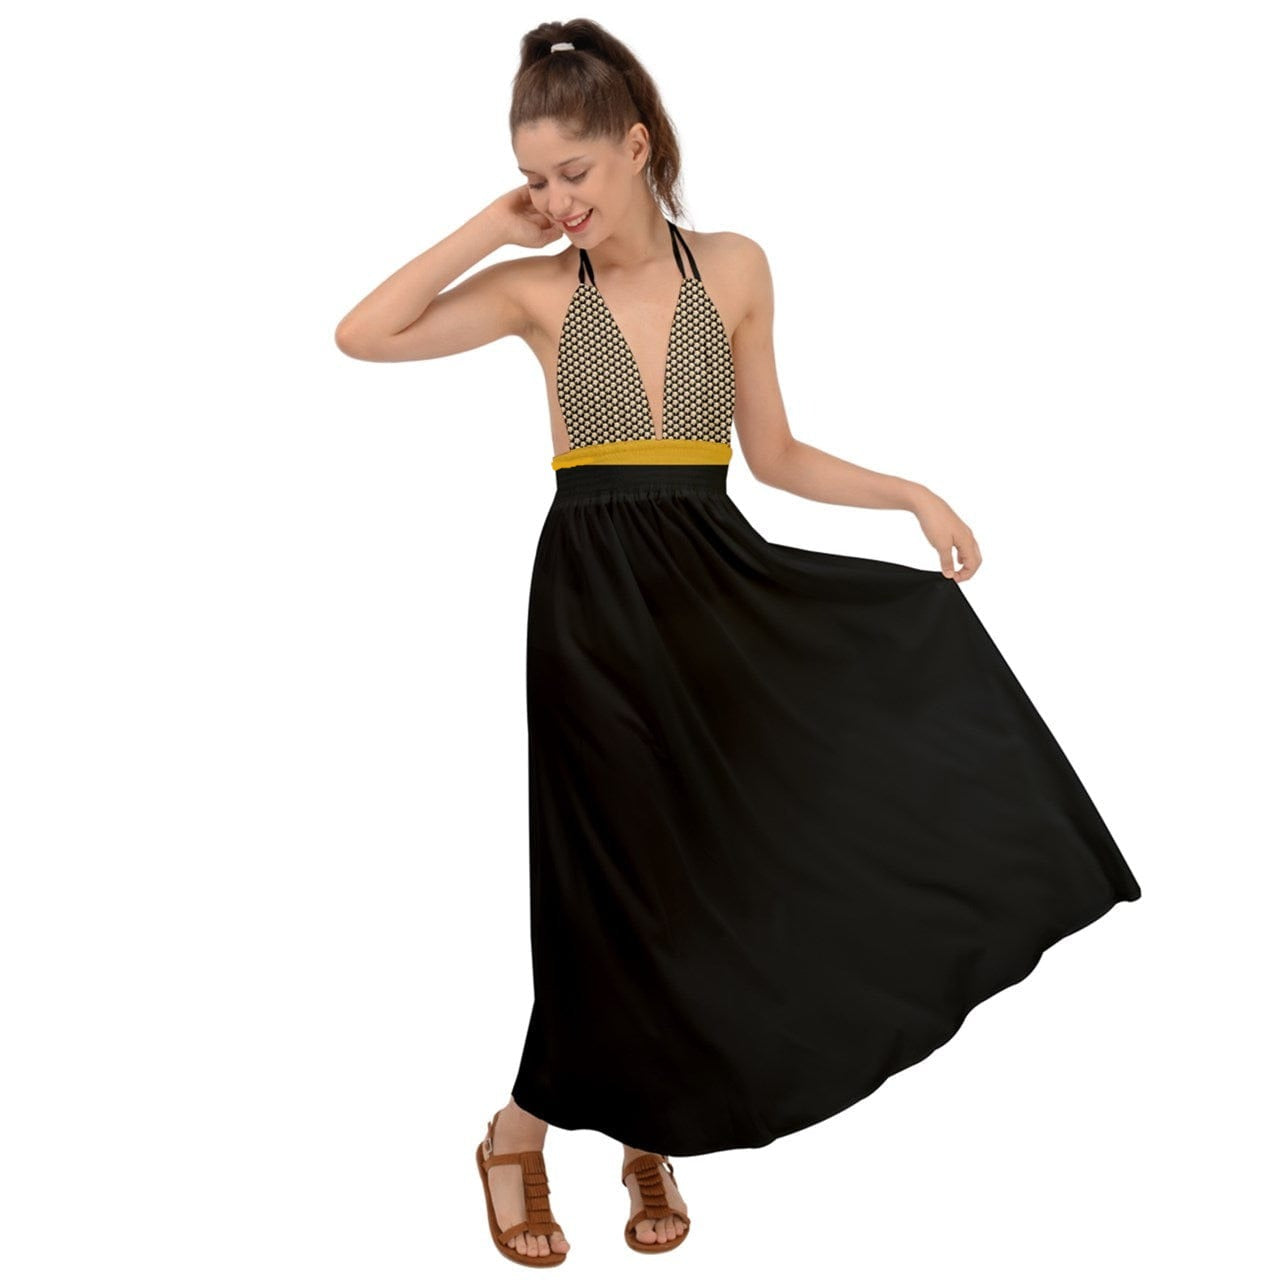 The wheaten store Wheaten Puppy Backless Maxi Party Dress Black & Gold